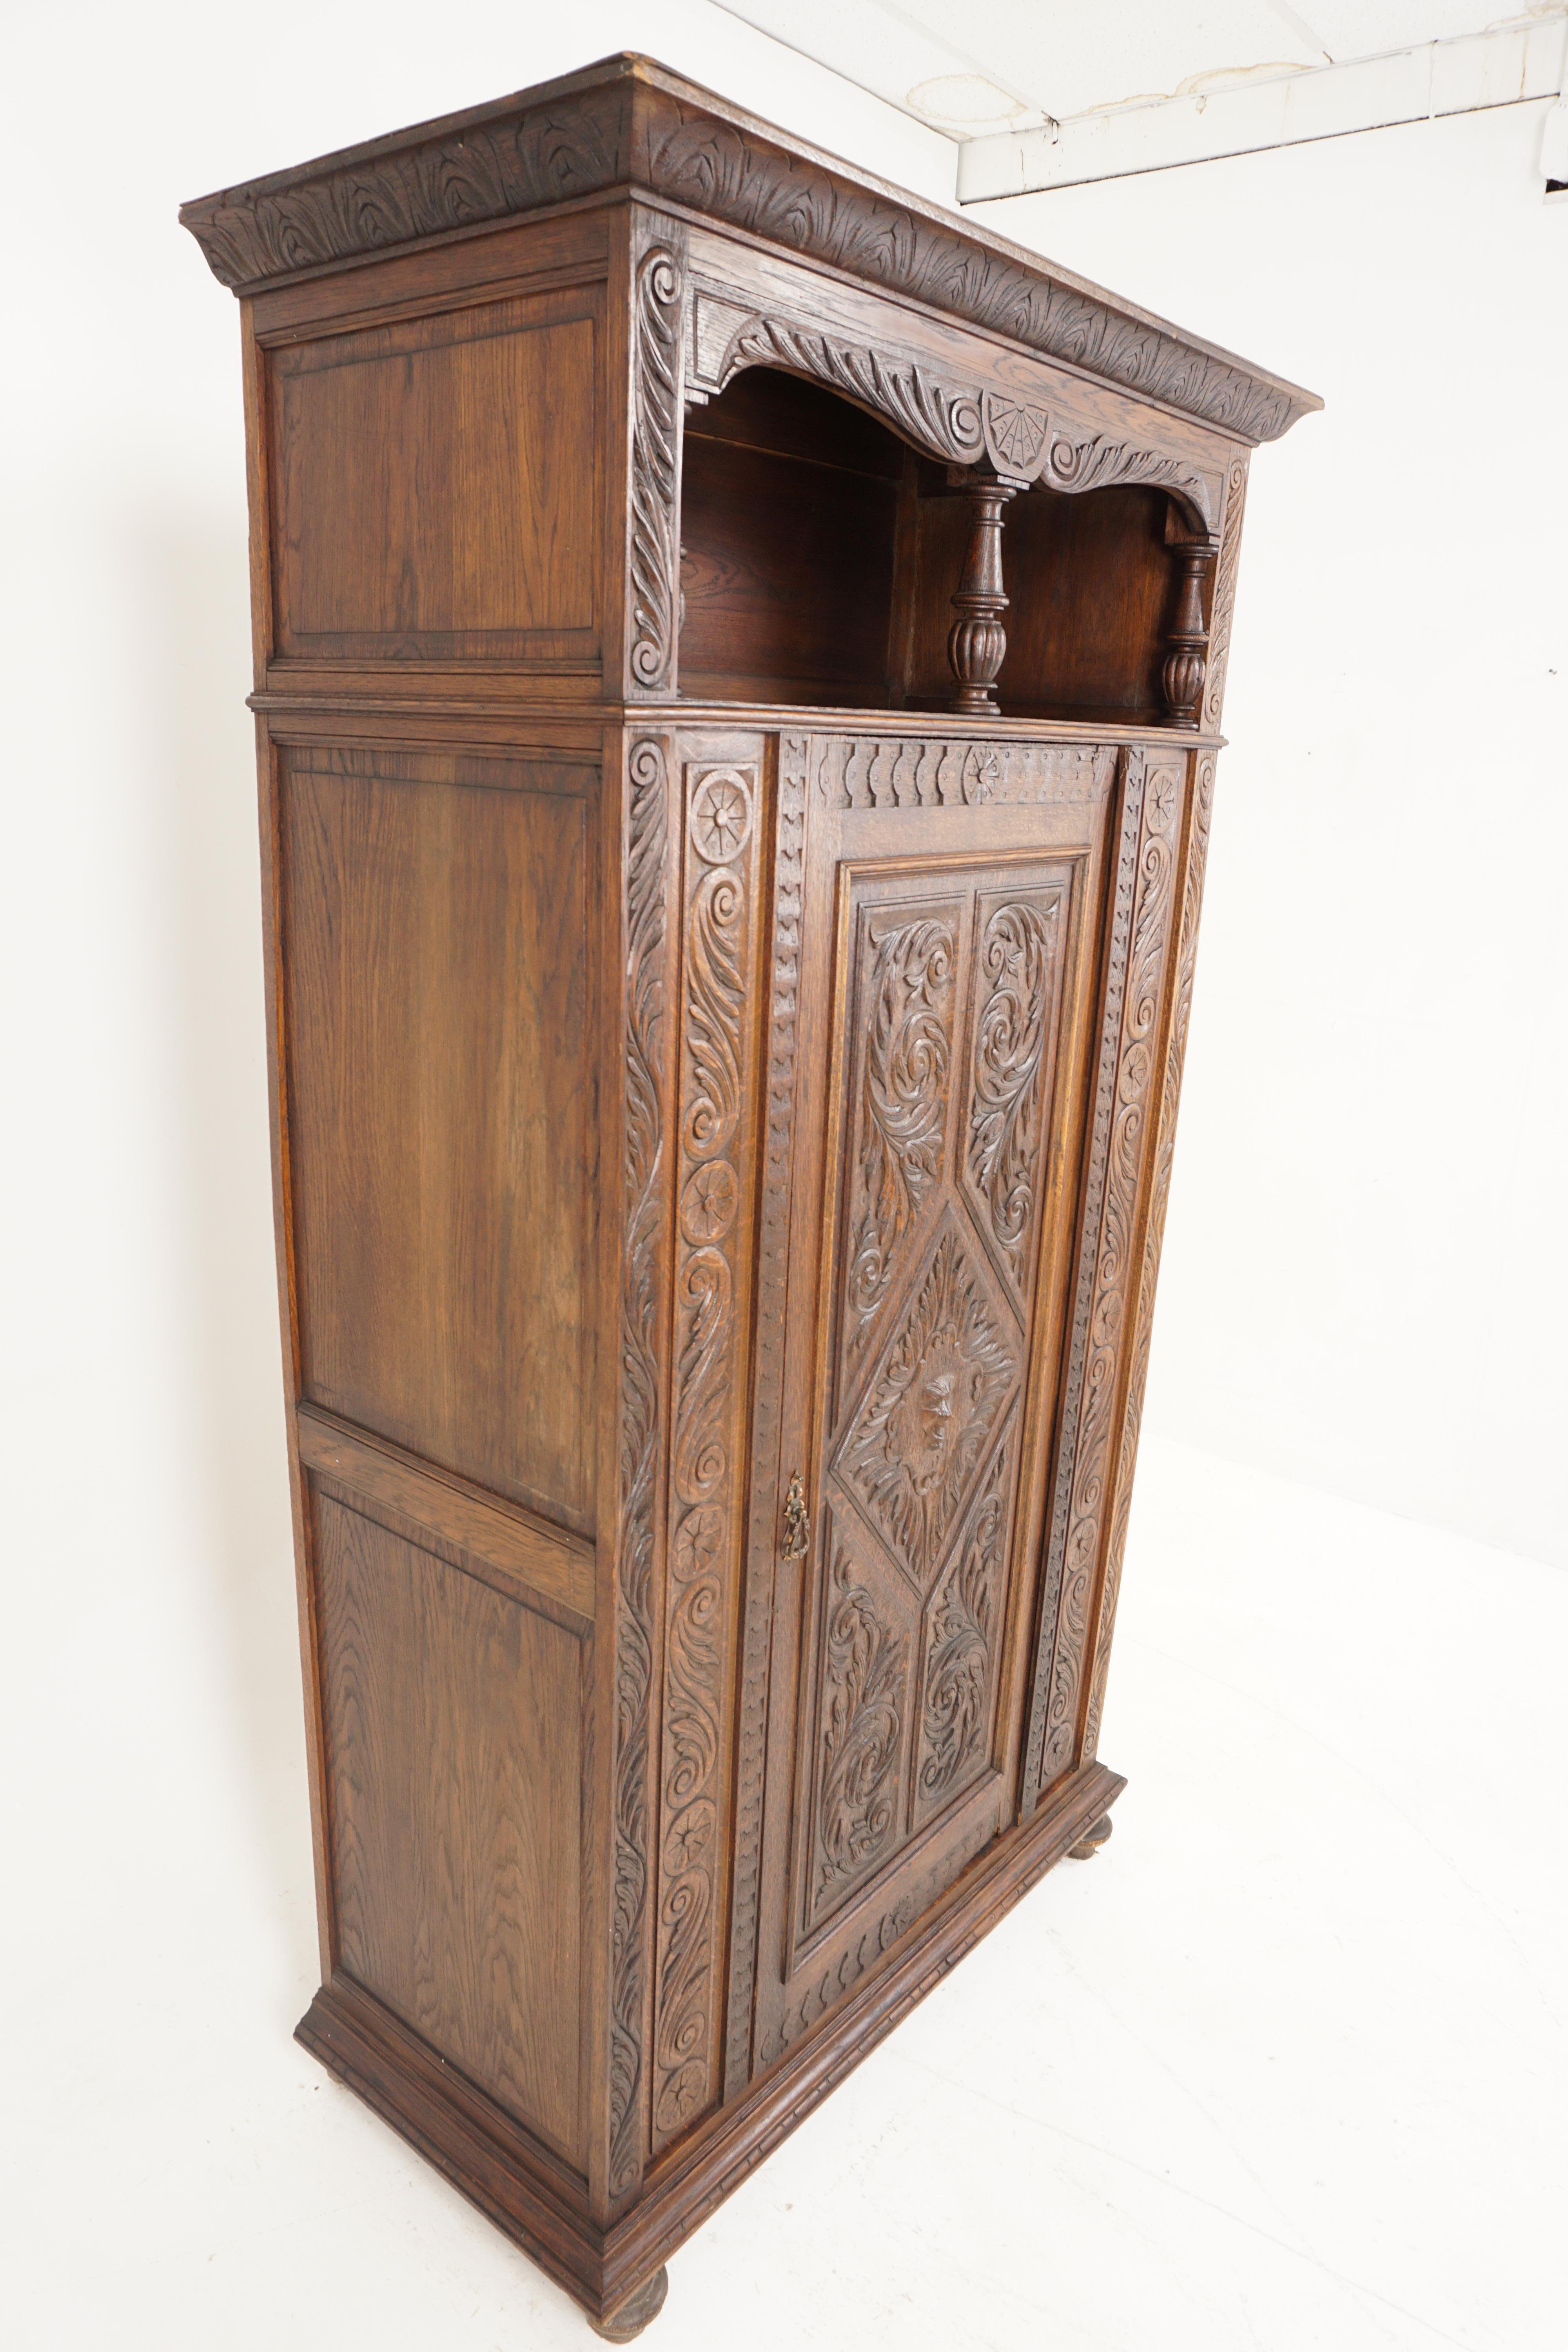 Antique Victorian armoire, carved oak, hall wardrobe, Scotland 1870, B2637

Scotland 1870
Solid oak
Original original finish.
Carved moulded cornice.
Open shaped cupboard below.
With three turned spindles to the front.
Single carved door